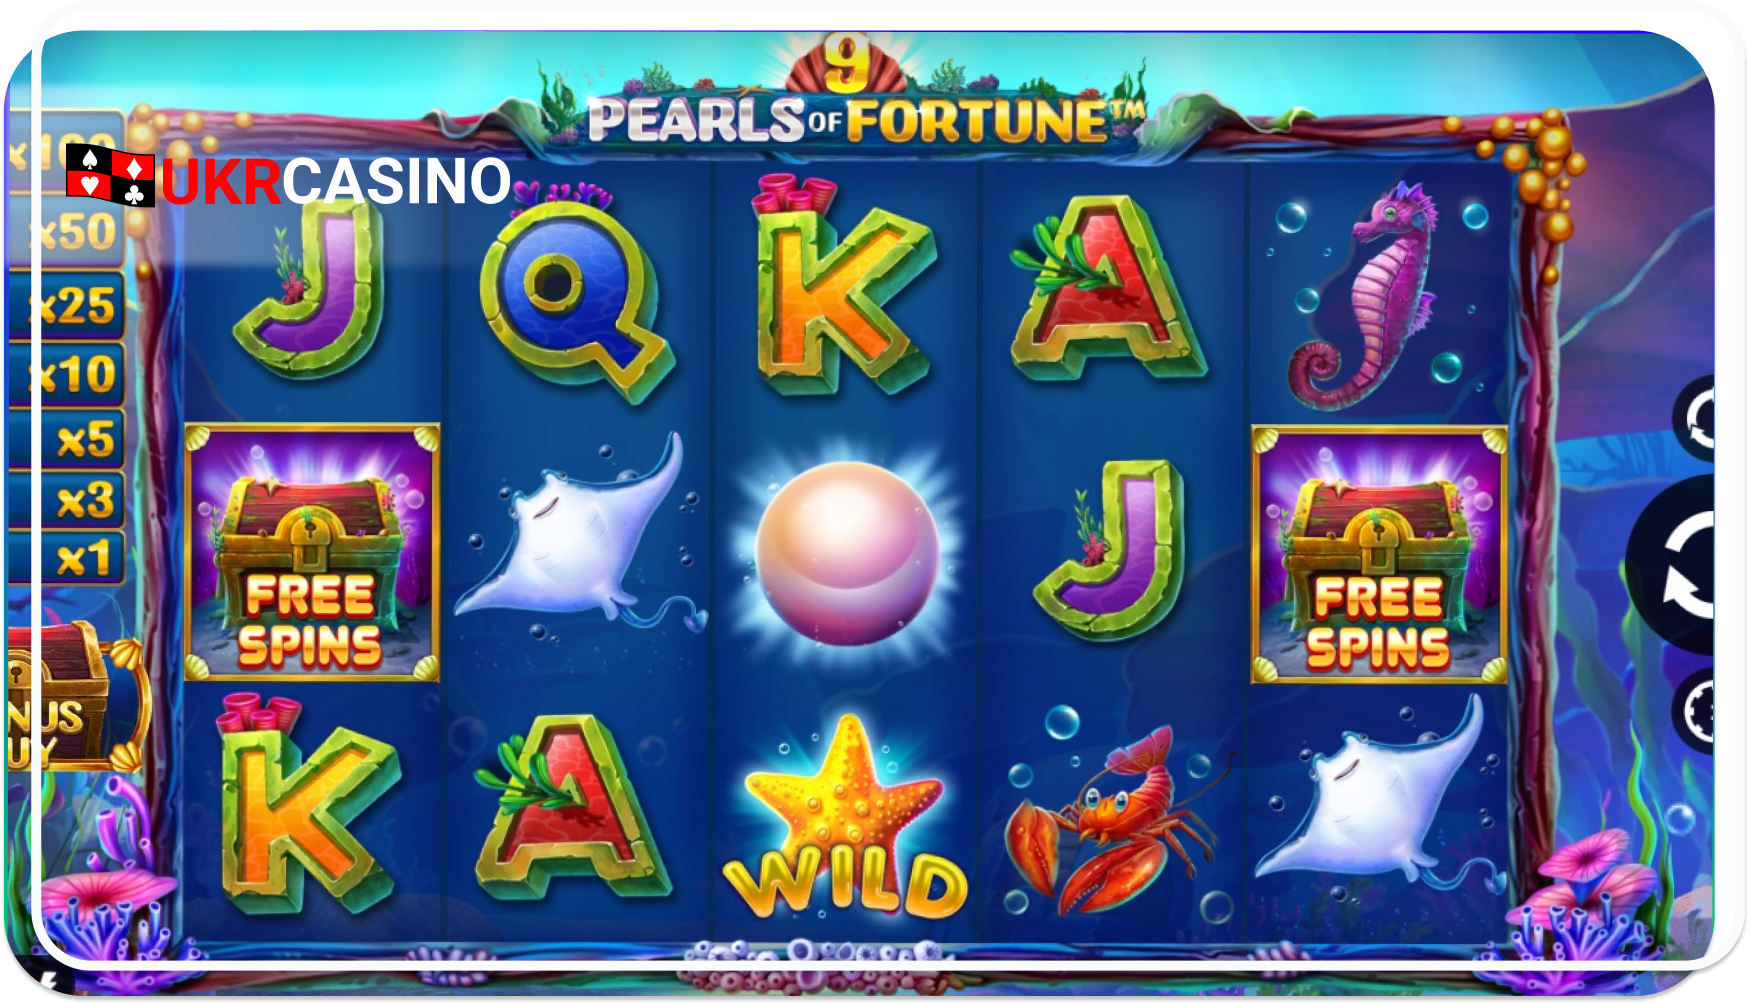 9 Pearls of Fortune-iSoftBet slot